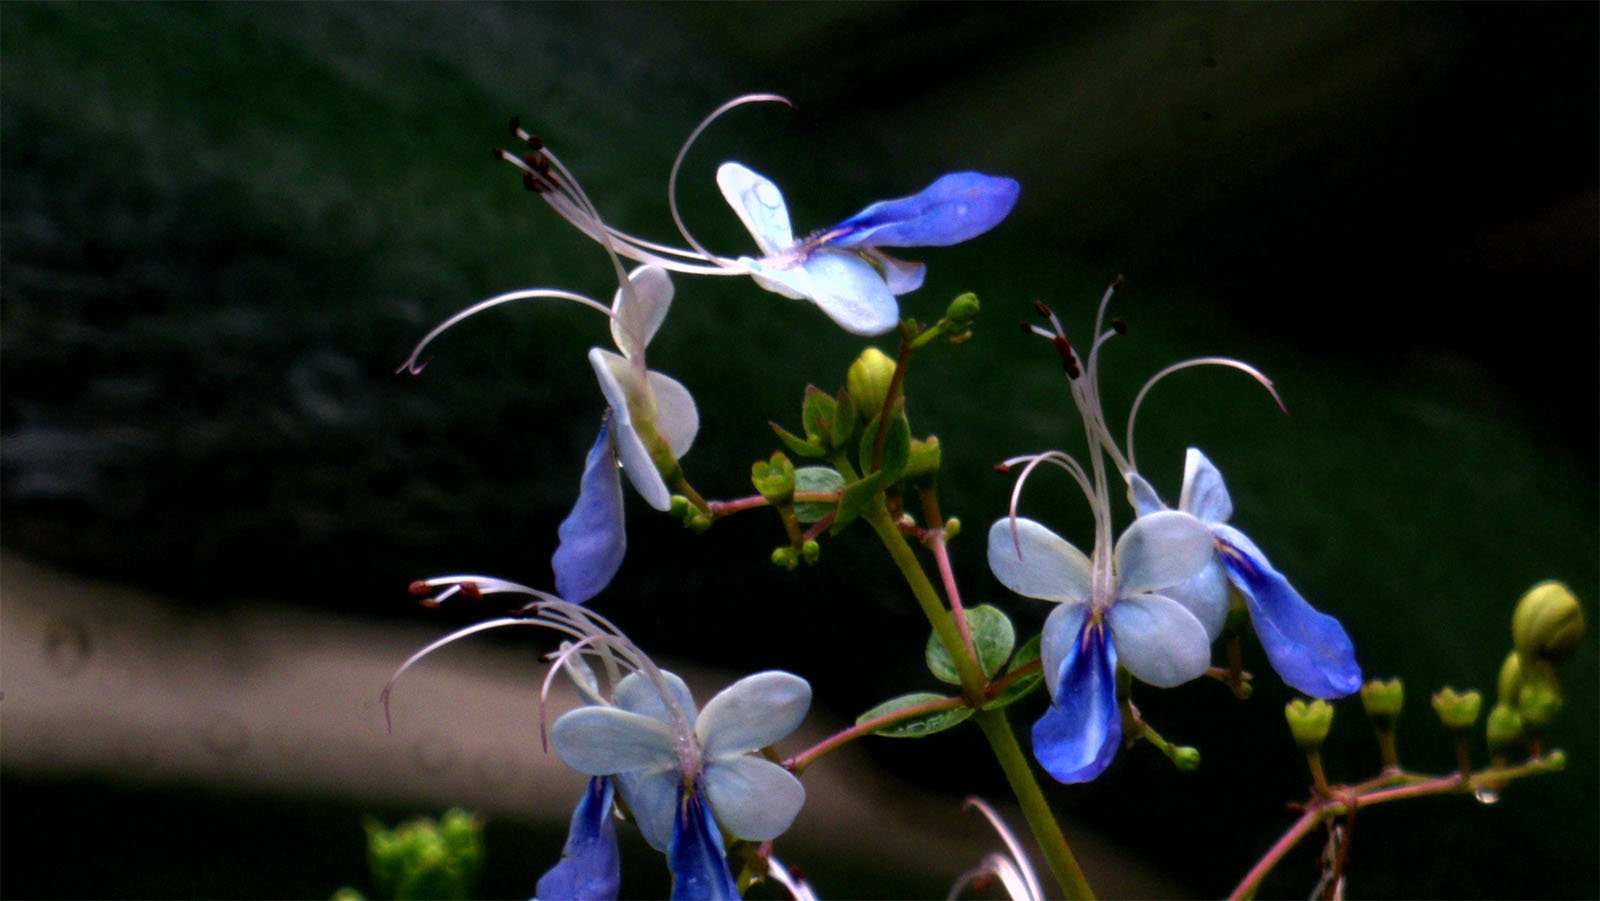 Delicate blue clerodendrum flowers, with long white stamens extending from their centers, against a dark blurred background.